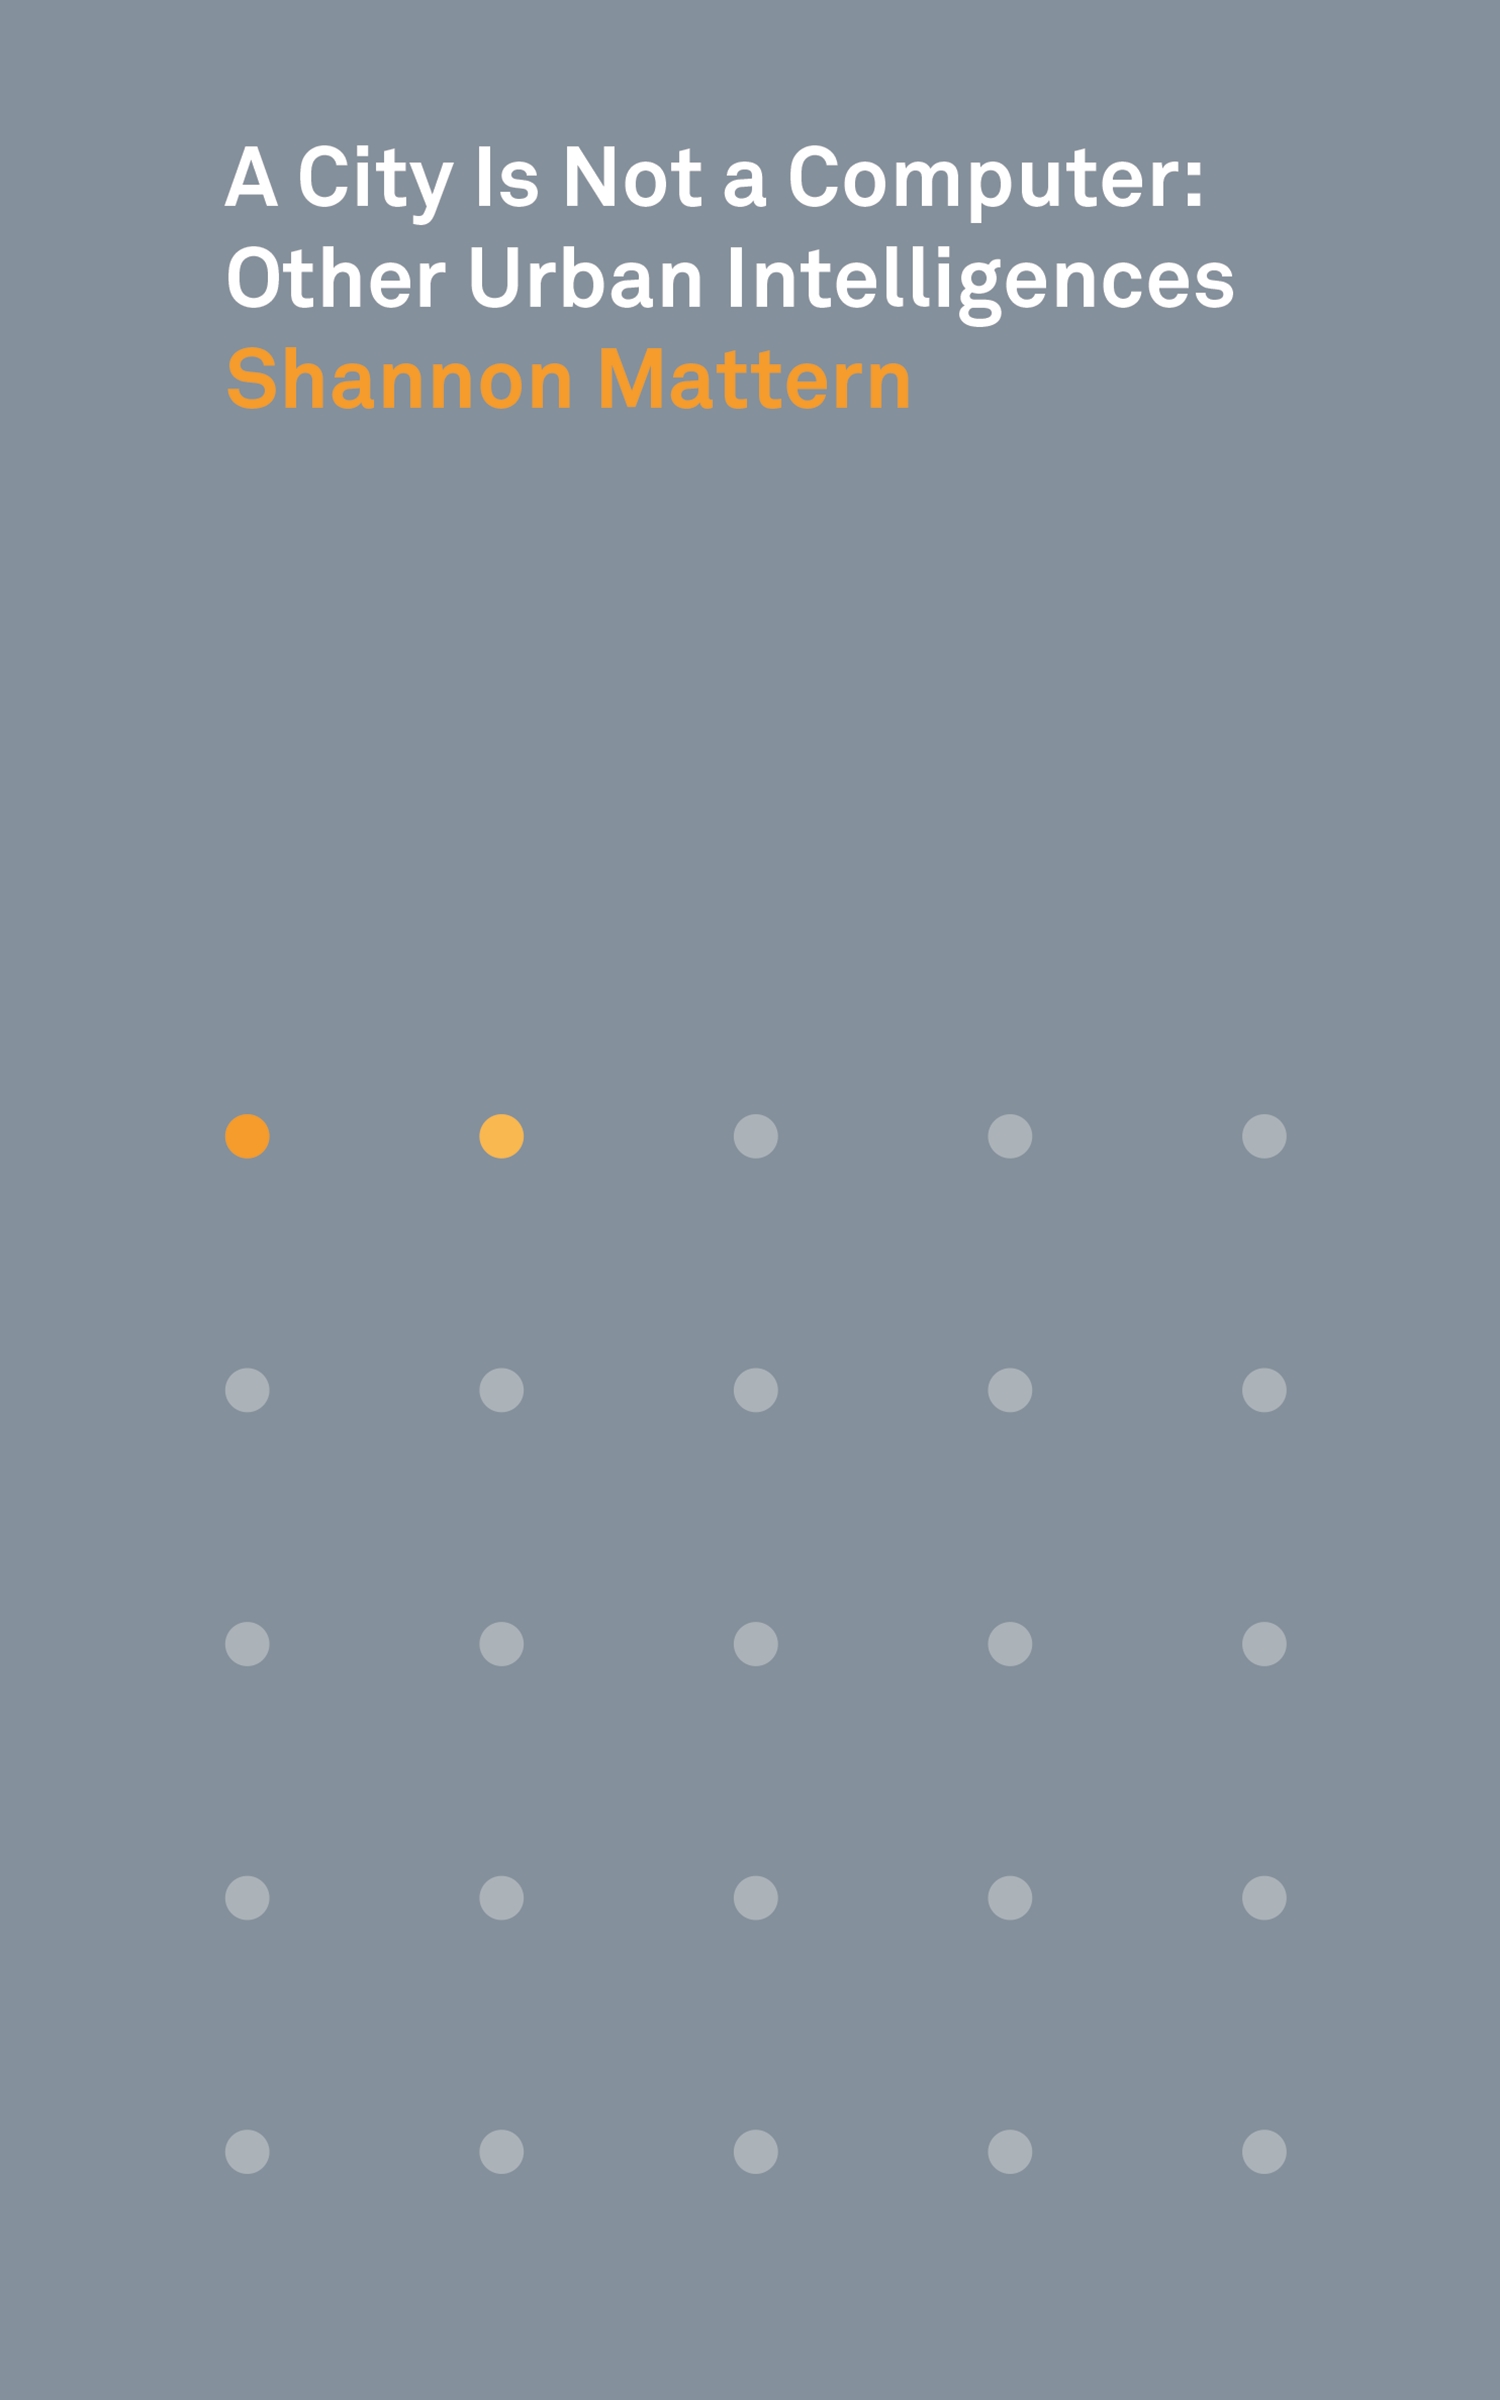 GRAY BOOK COVER WITH WHITE AND ORANGE FONT AND DOTS